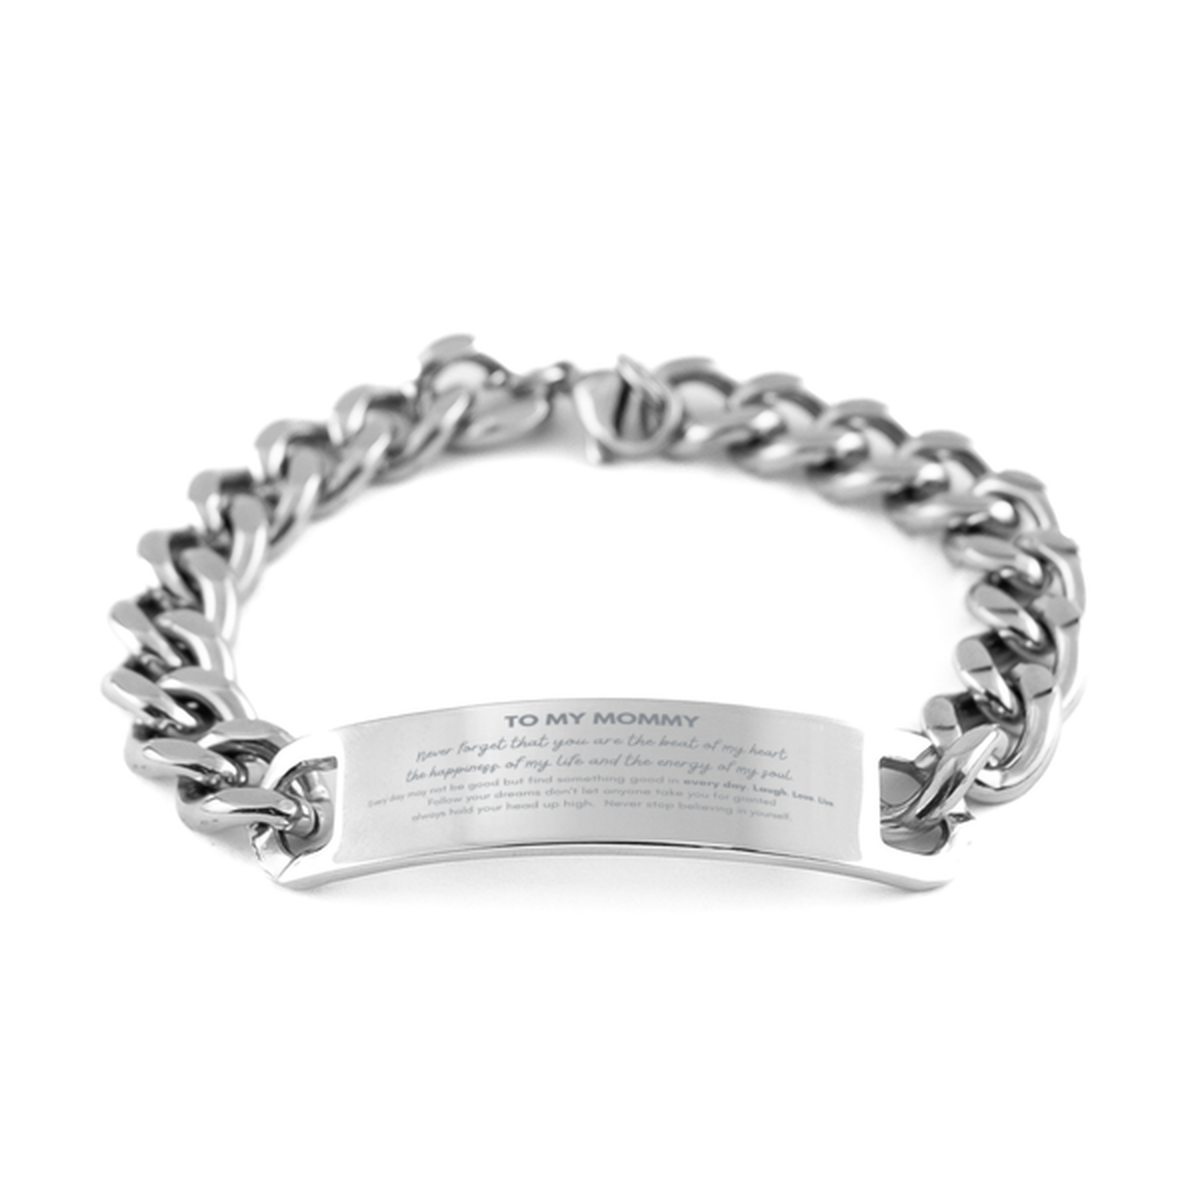 To My Mommy Bracelet Gifts, Christmas Mommy Cuban Chain Stainless Steel Bracelet Present, Birthday Unique Motivational For Mommy, To My Mommy Never forget that you are the beat of my heart the happiness of my life and the energy of my soul